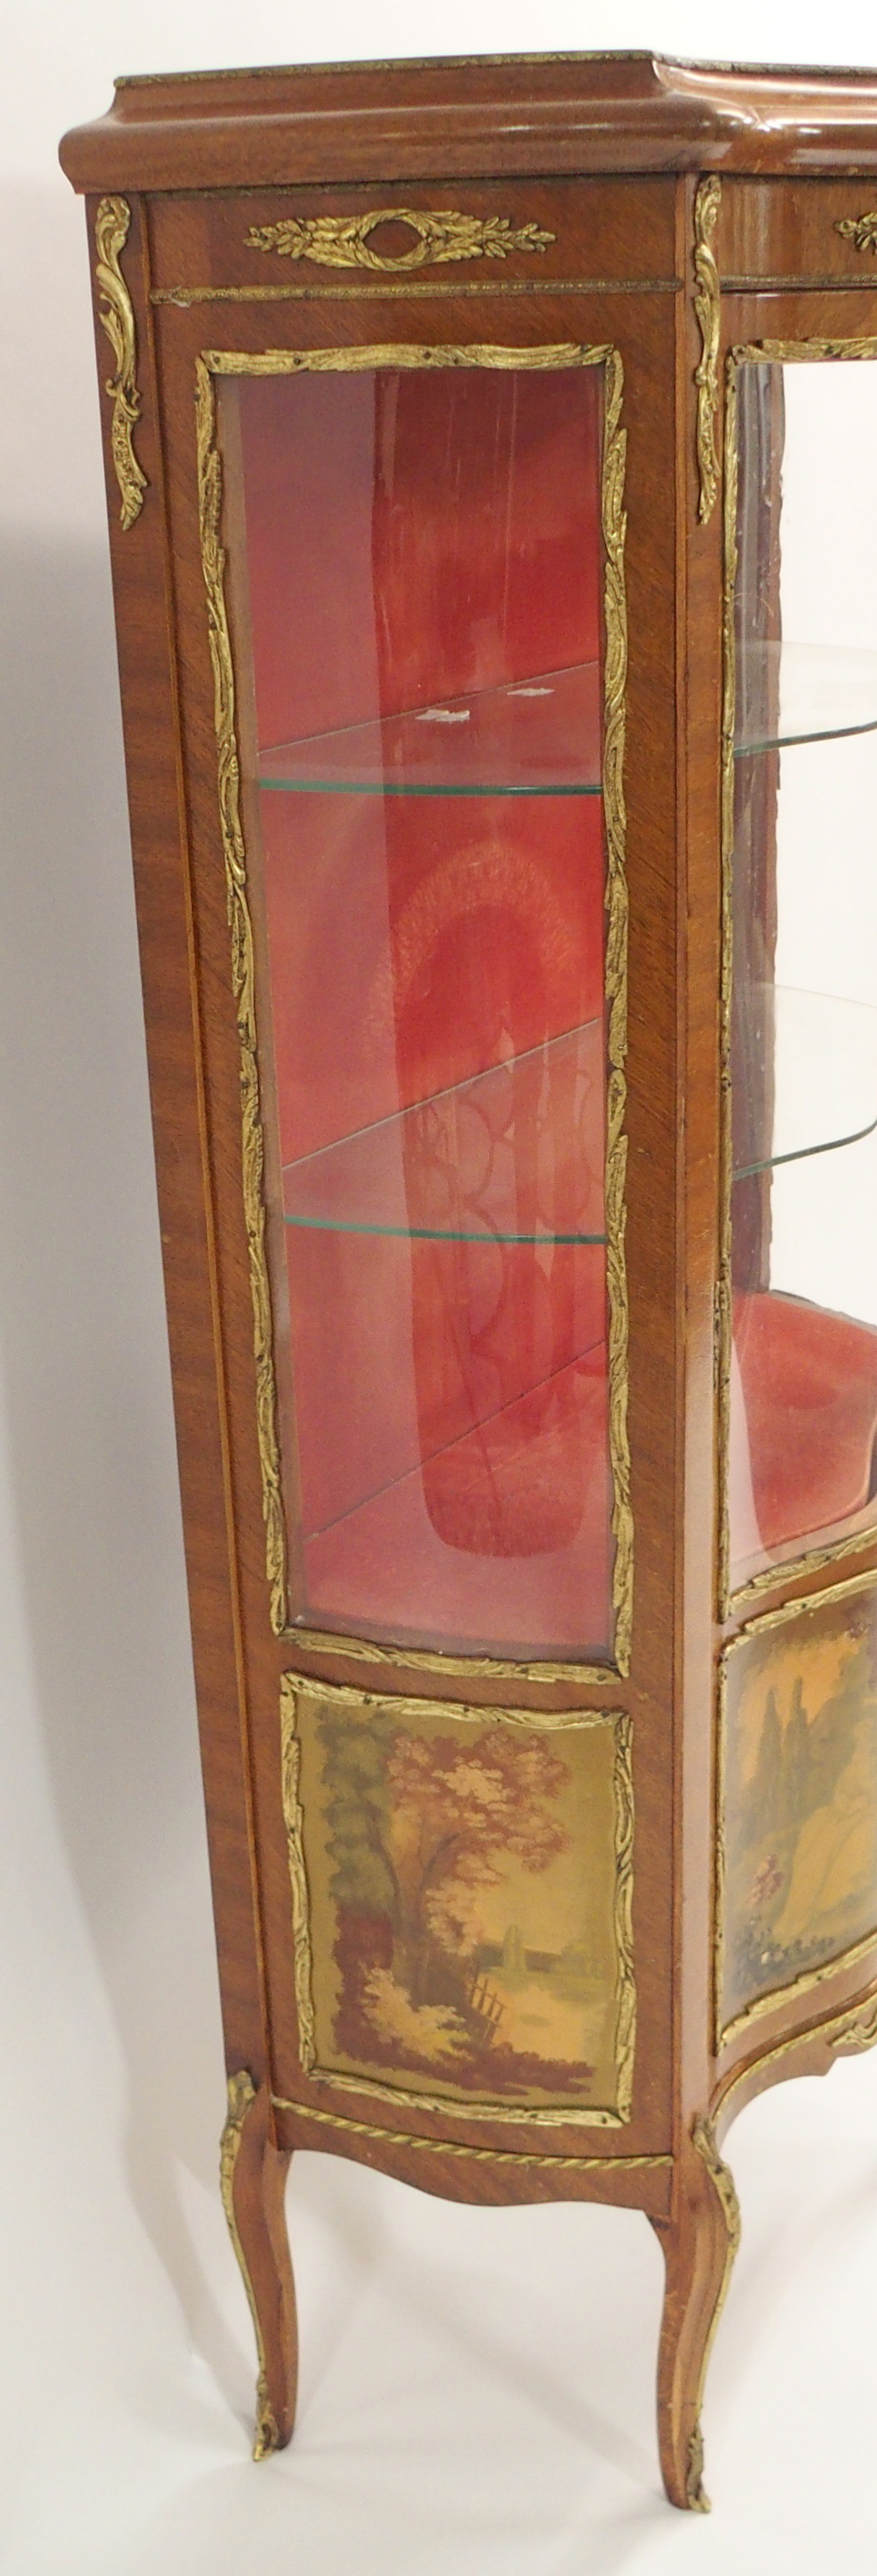 A VERNIS MARTIN STYLE FRUITWOOD DISPLAY CABINET the serpentine door and sides enclosing glass - Image 6 of 12